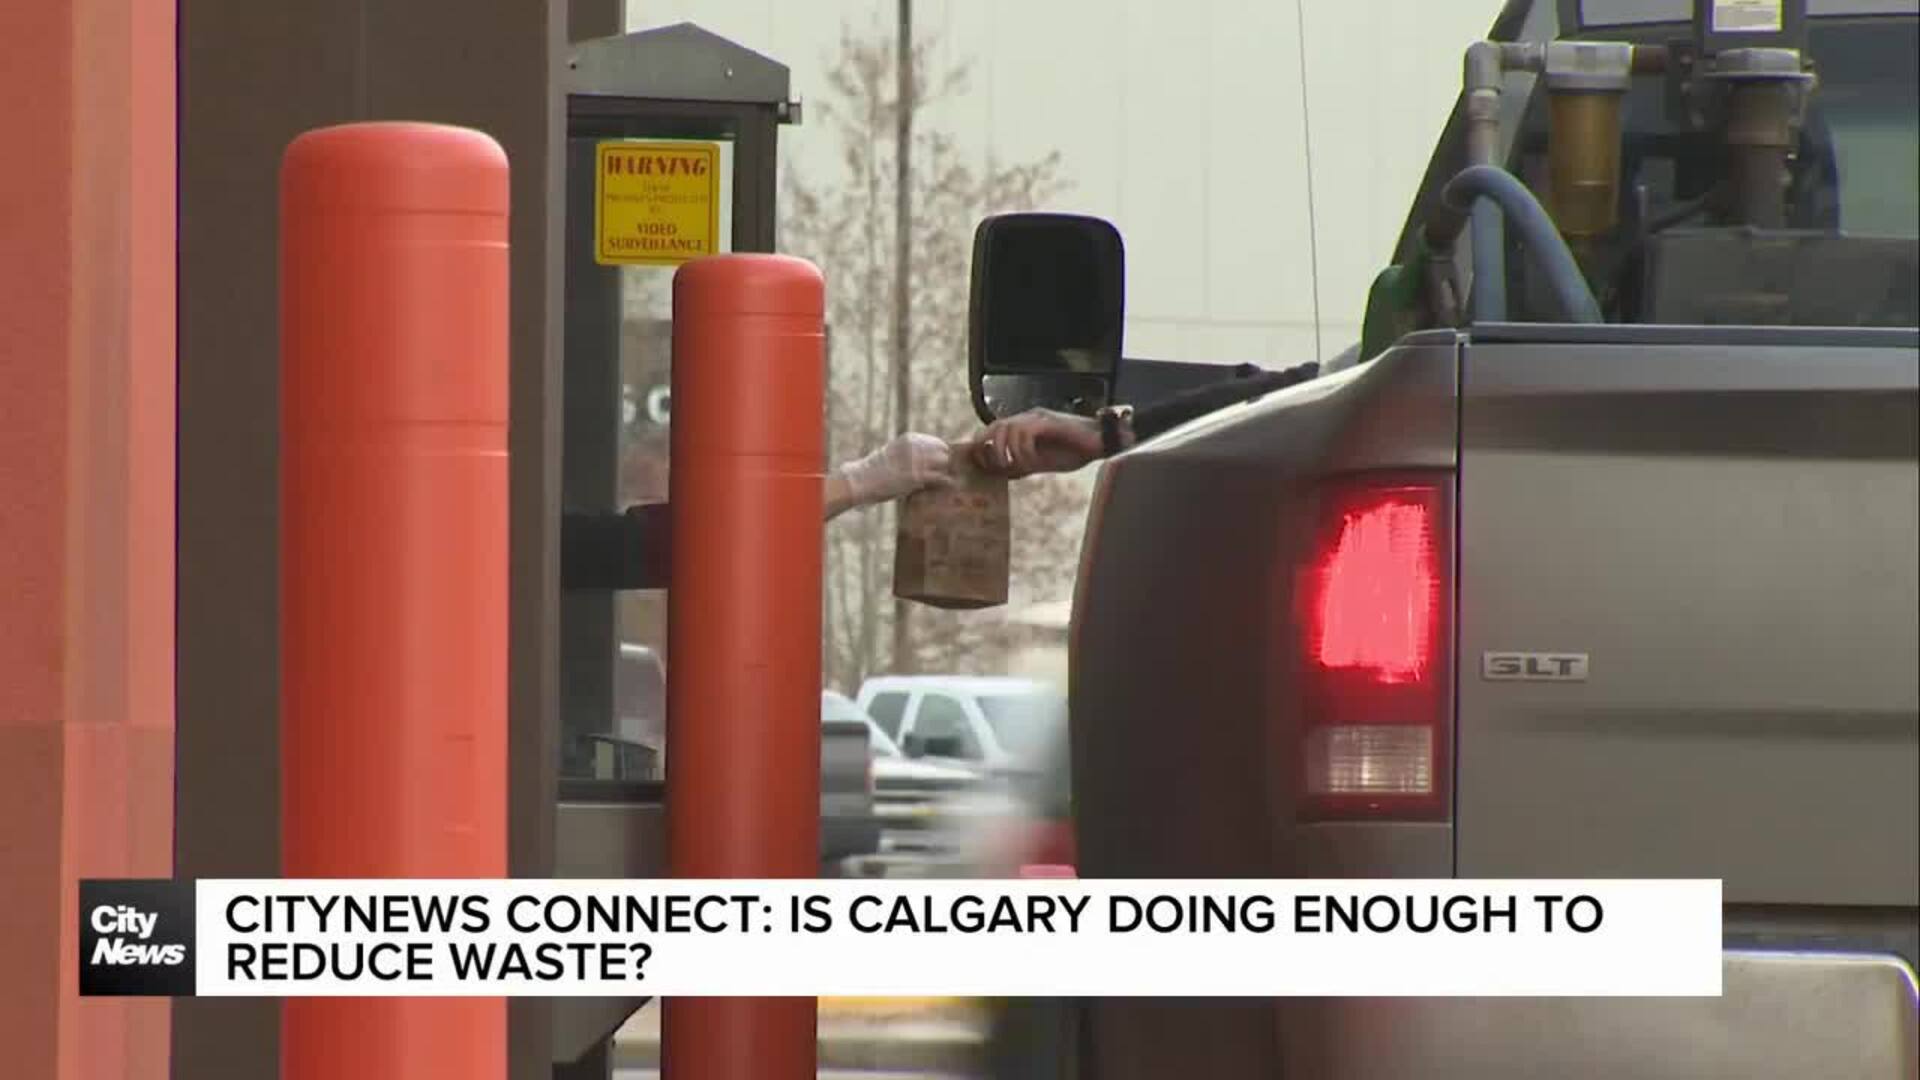 CityNews Connect: Is Calgary doing enough to reduce waste?